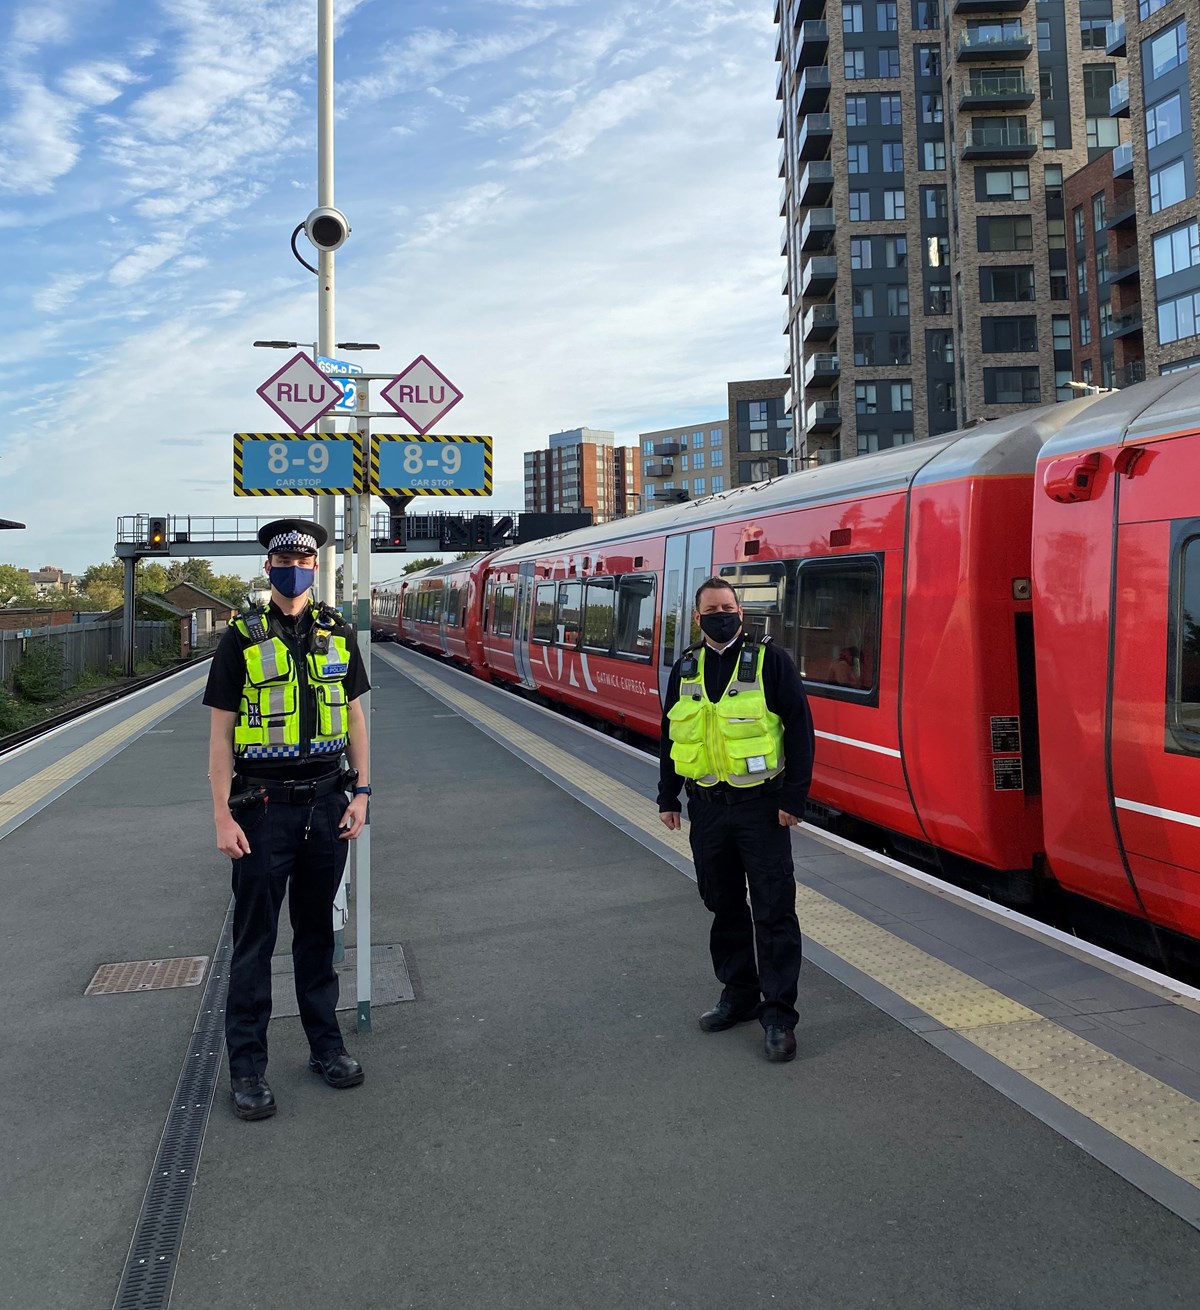 PC Lloyd and Southern employee Phil on Platforms 1 and 2 at East Croydon railway station